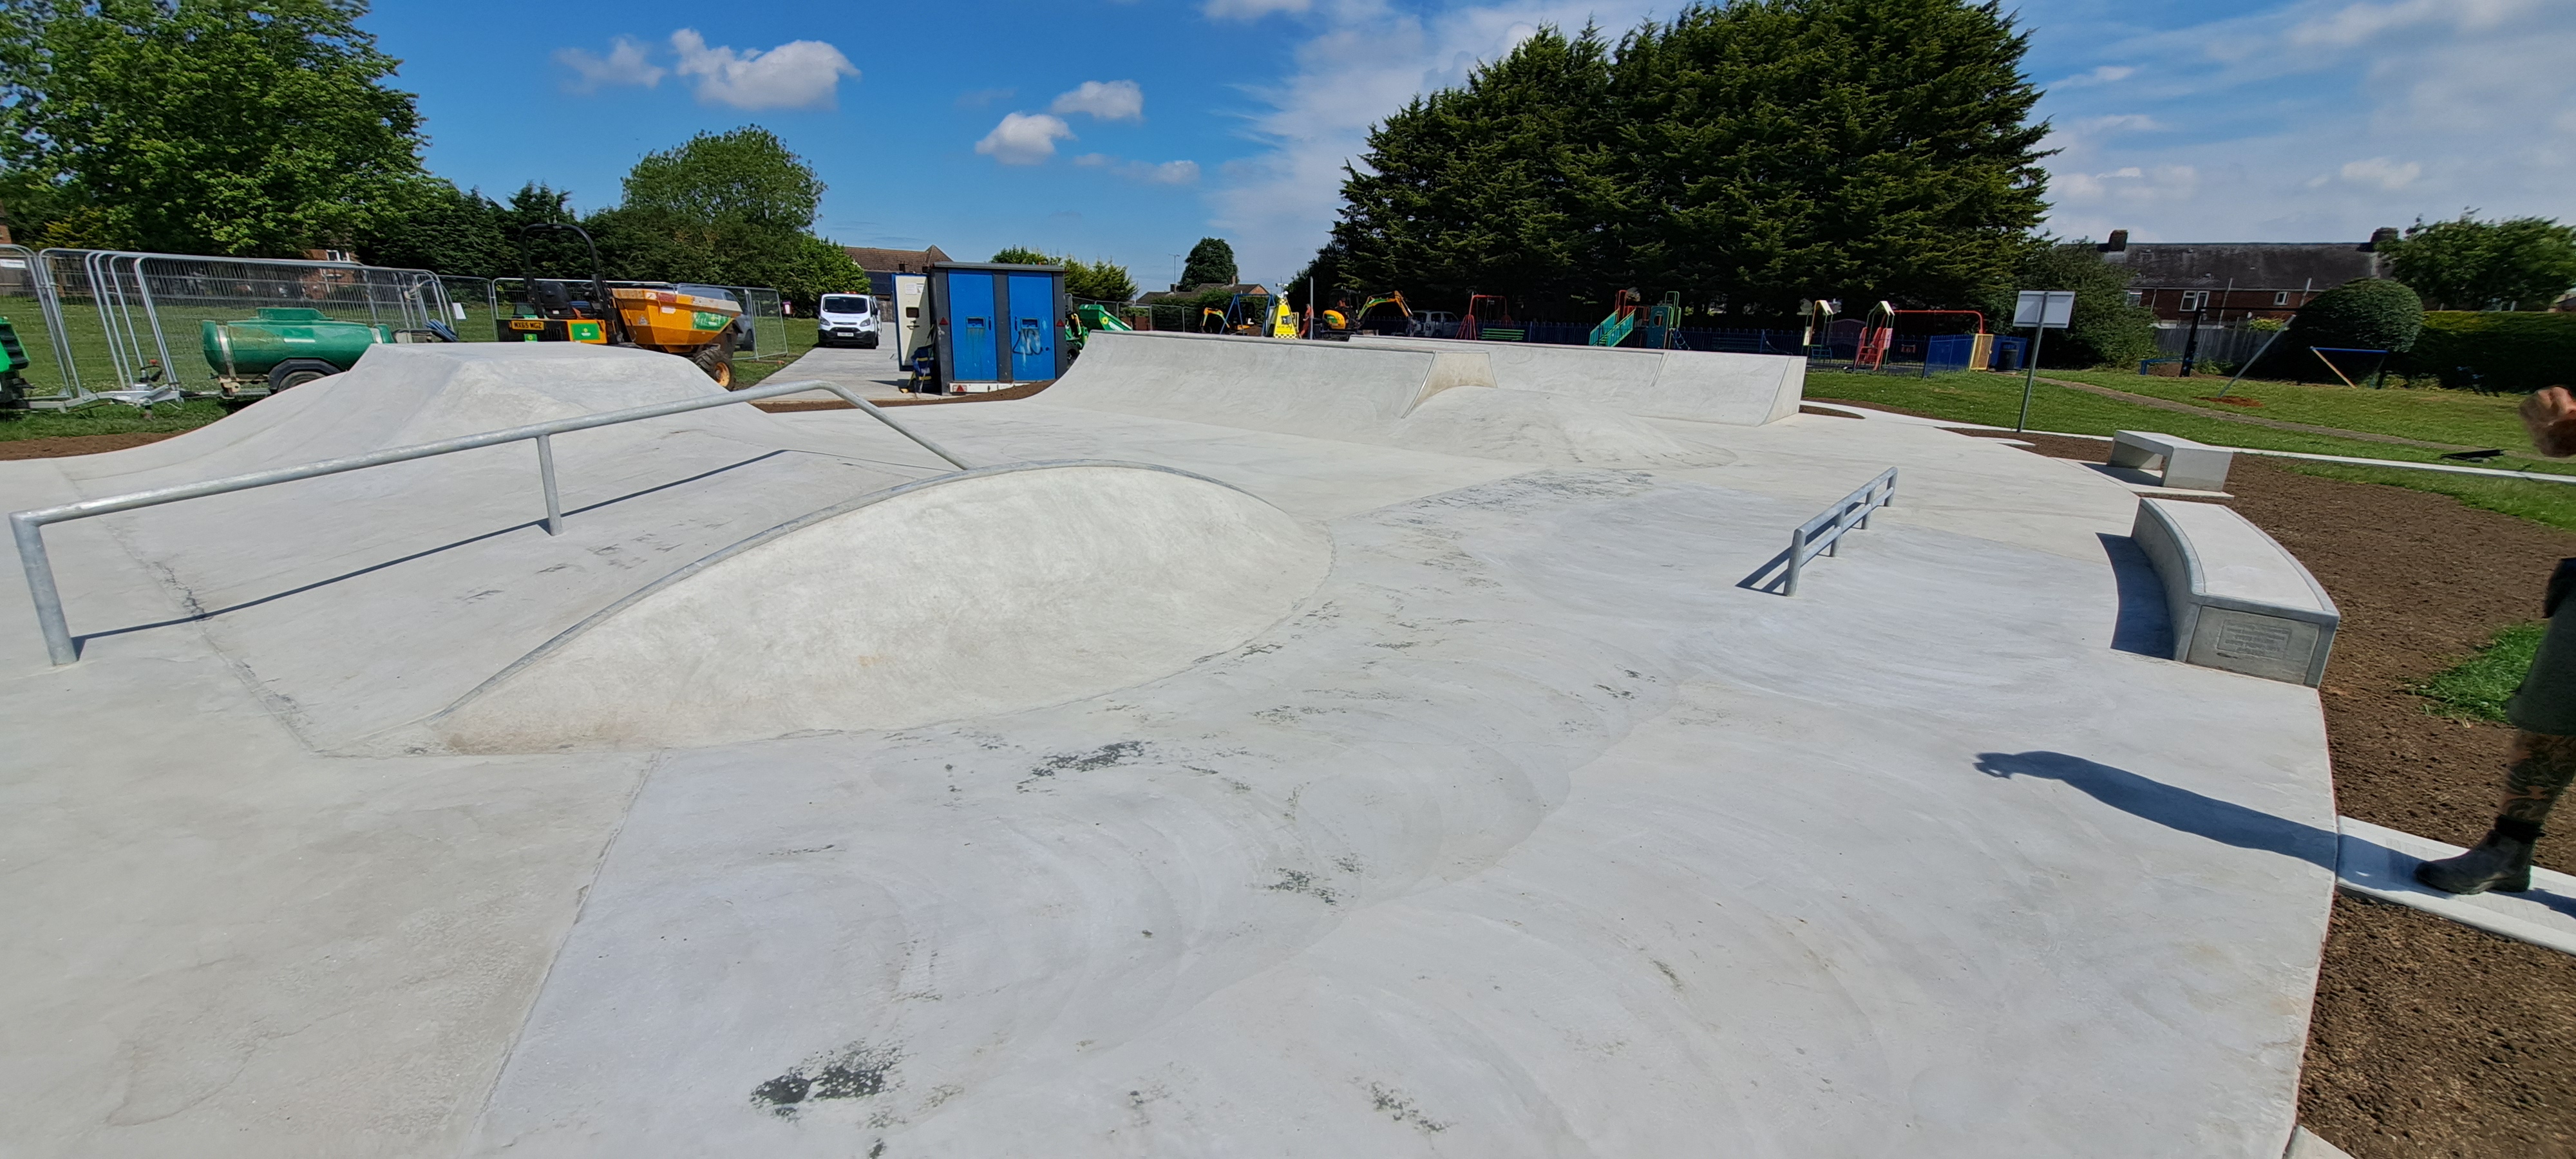 Image of bench, rails and ramps at Ramsey Road skatepark